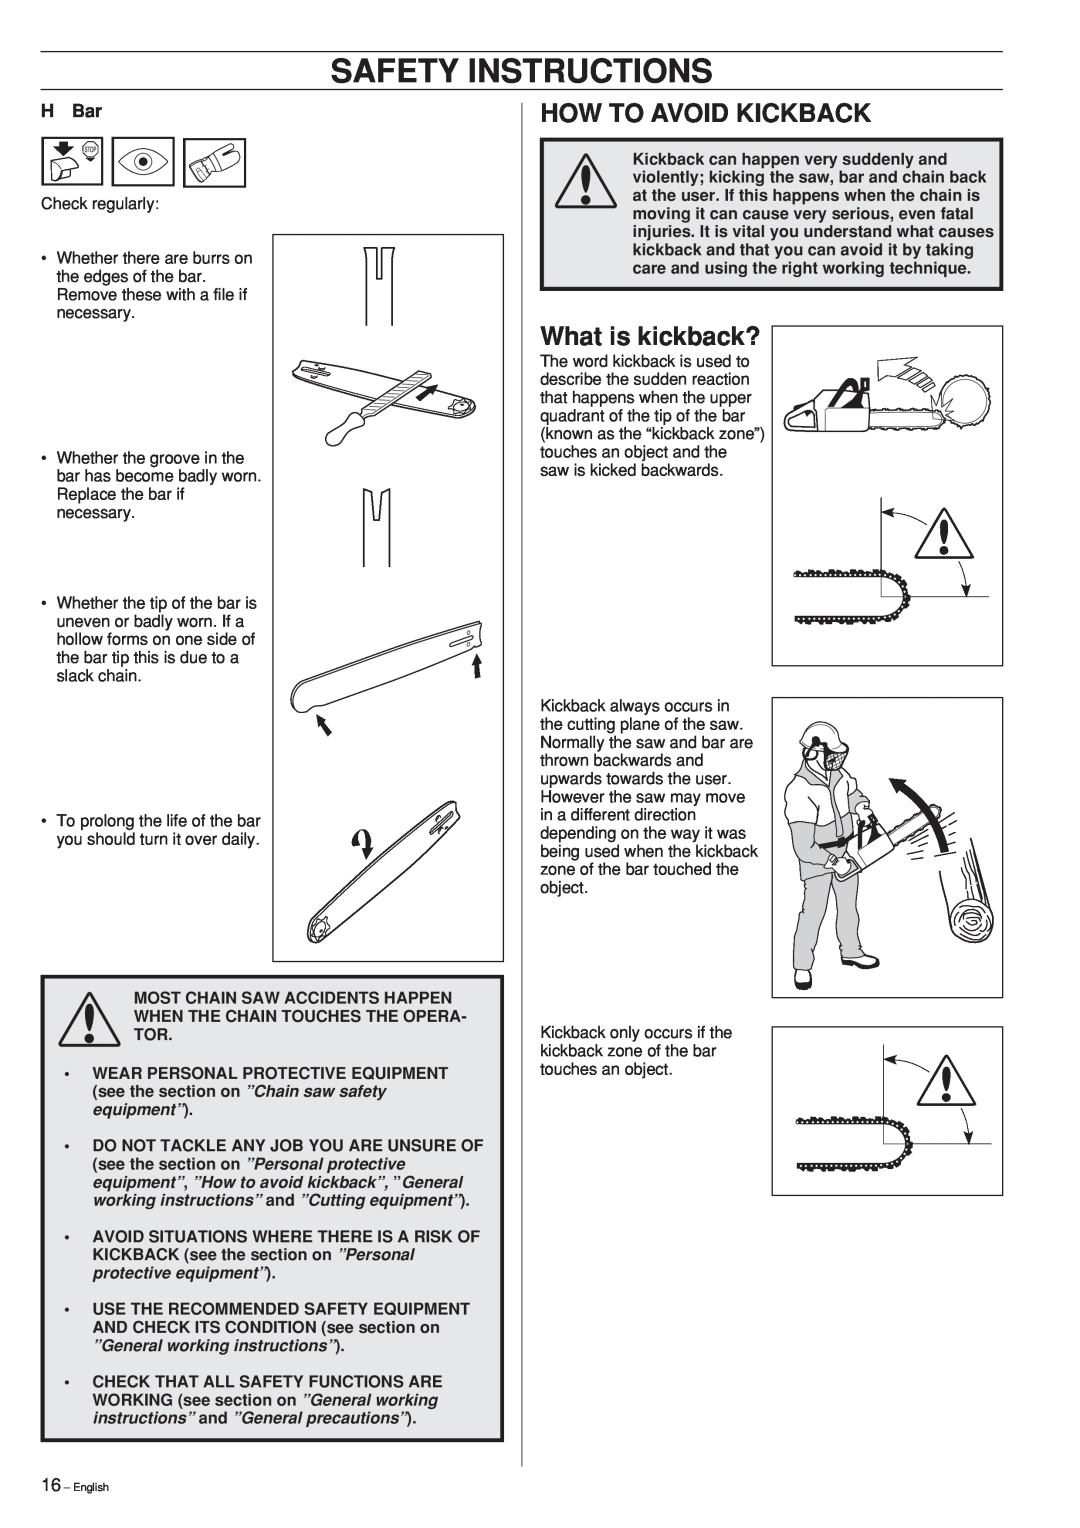 Jonsered 2145, 2141, 2150 manual How To Avoid Kickback, What is kickback?, H Bar, Safety Instructions 